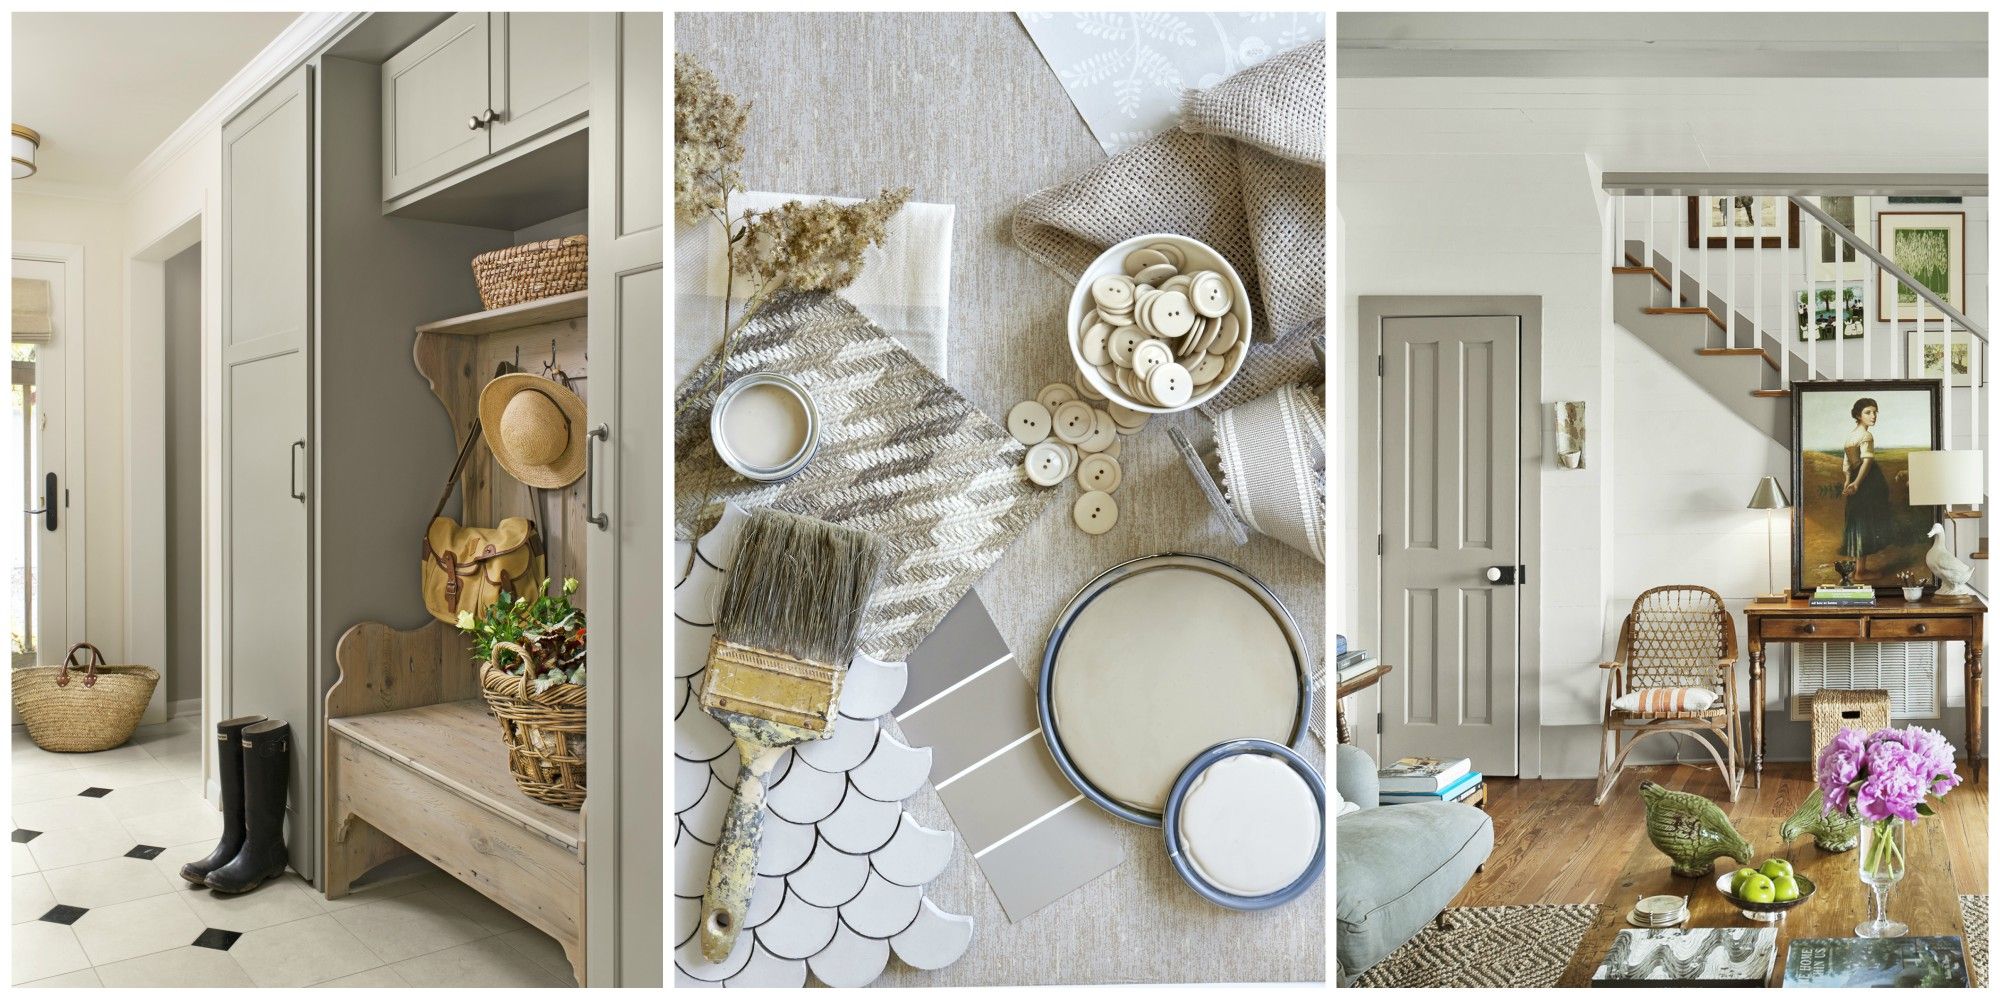 Mushroom is the Color Taking Over Pinterest And Homes in 2017 ...